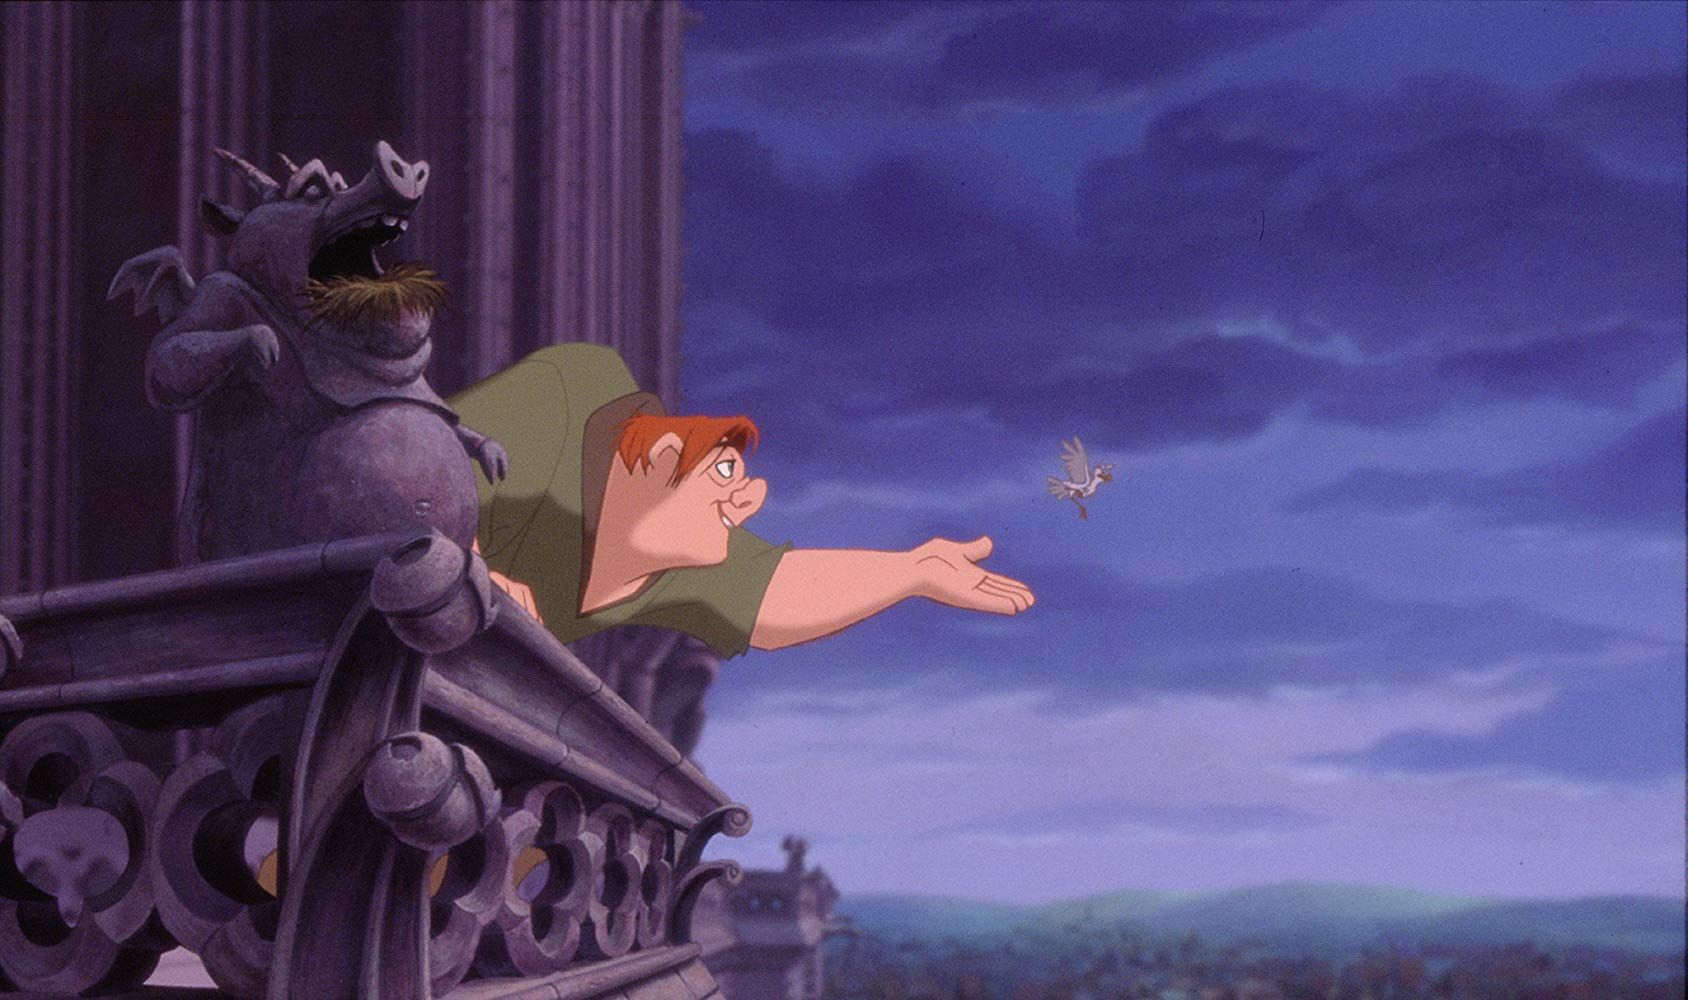 The Hunchback of Notre Dame Disney animated